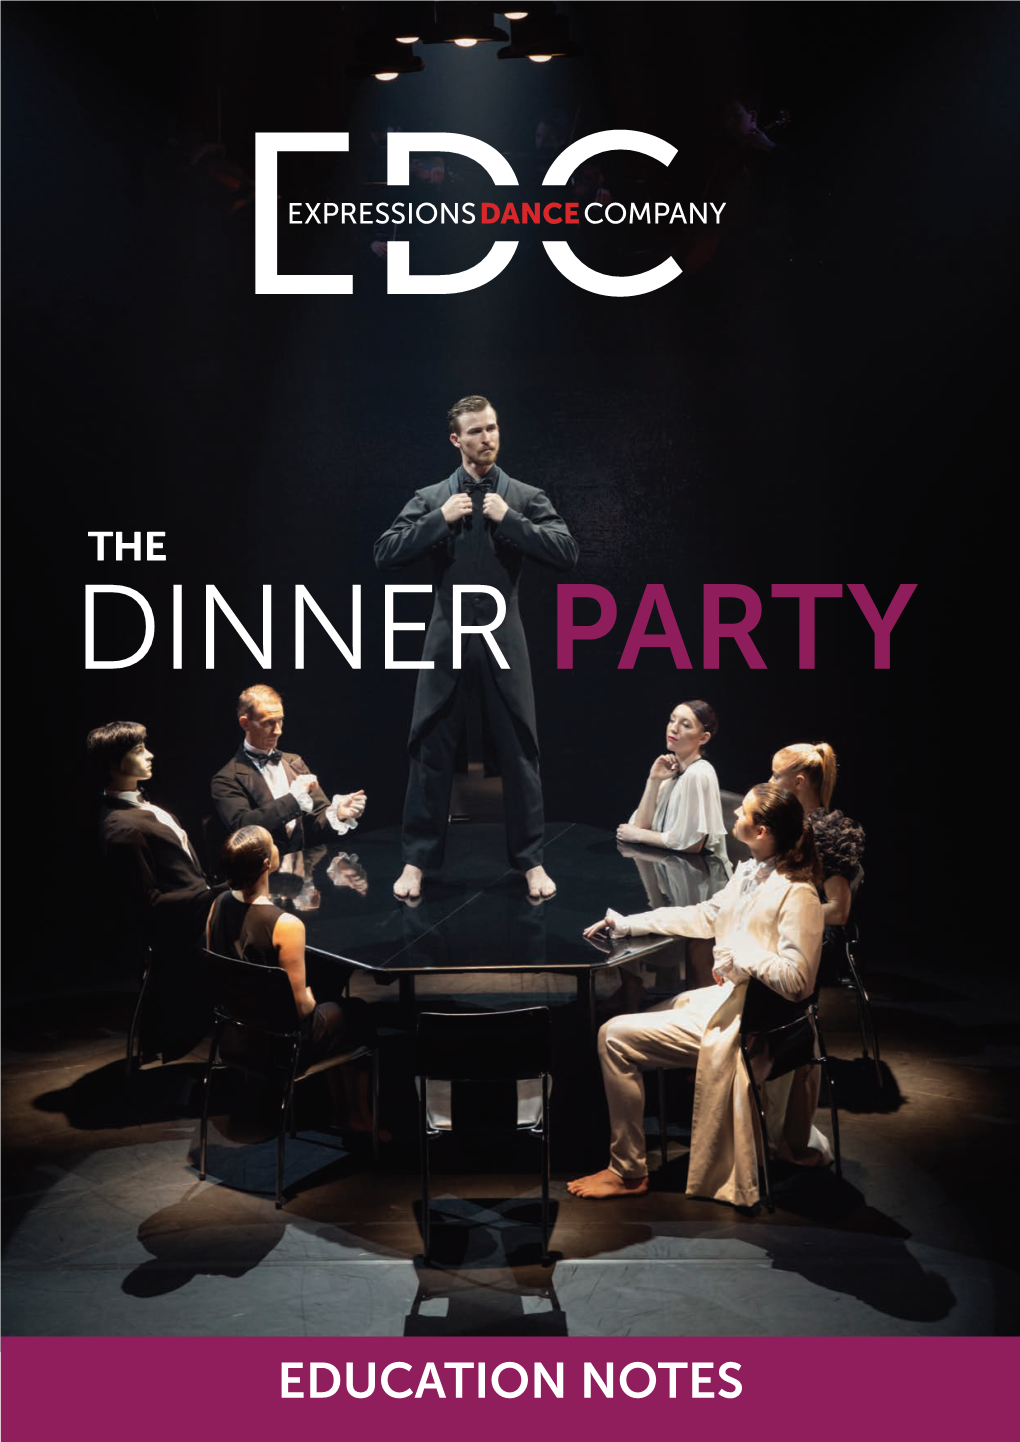 The Dinner Party 2019 Expressions Dance Company